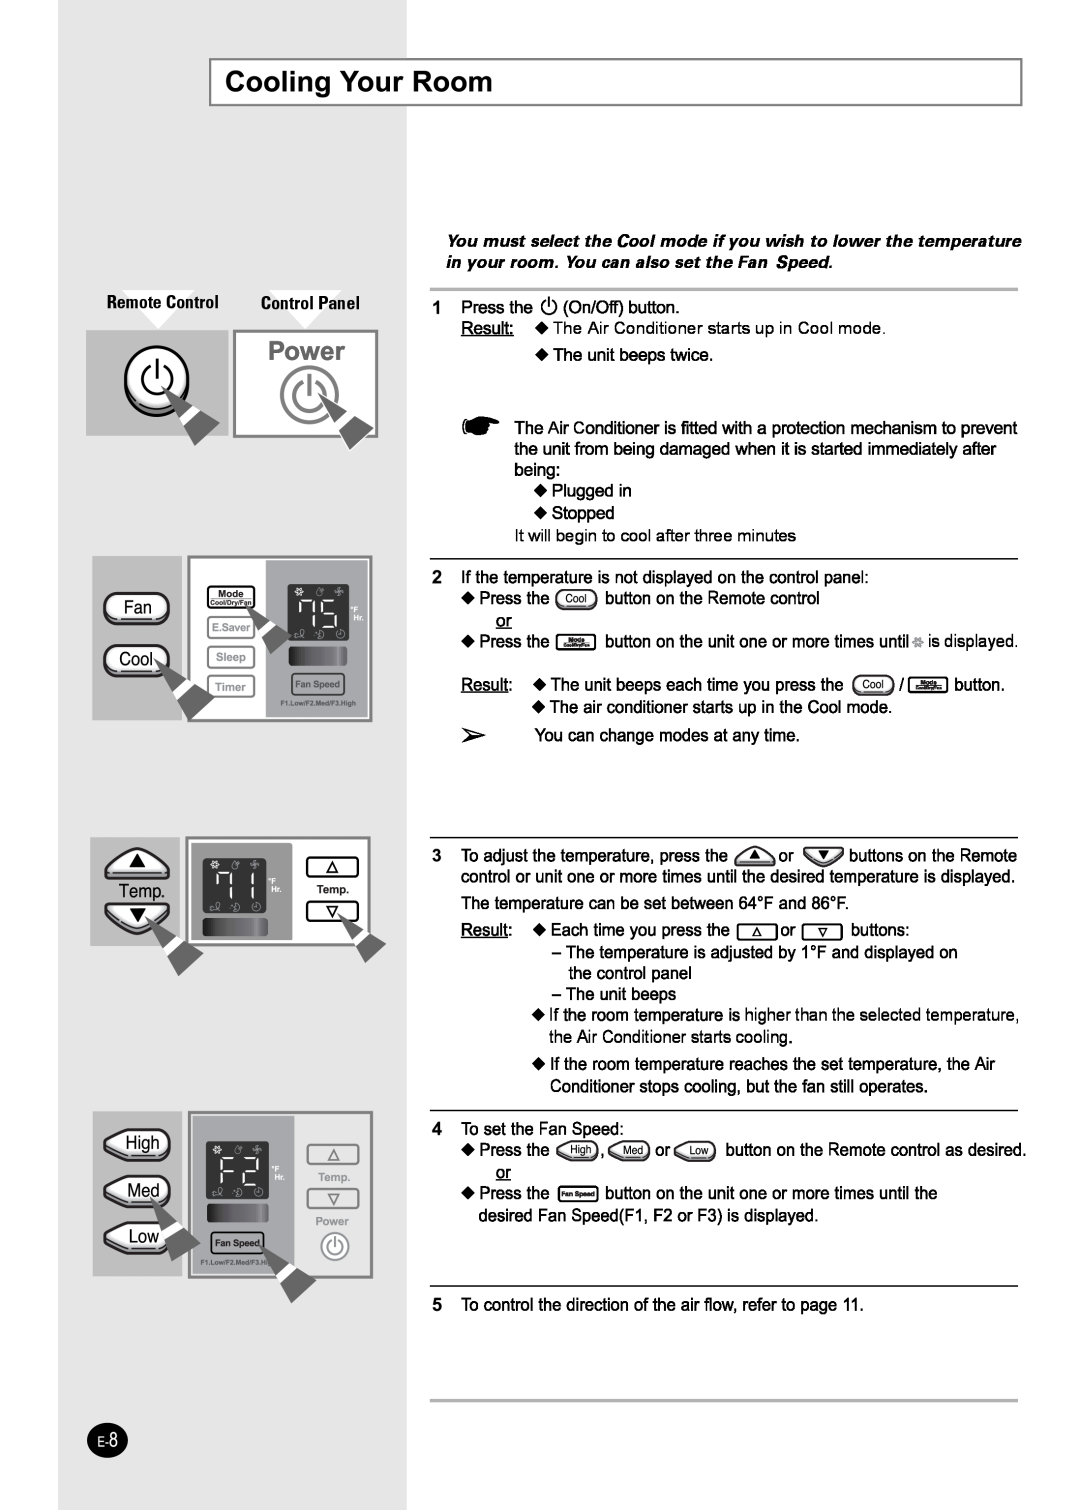 Samsung AW25ECB7 manual Remote Control, The Air Conditioner starts up in Cool mode AC, is displayed R, Fs S, Control Panel 